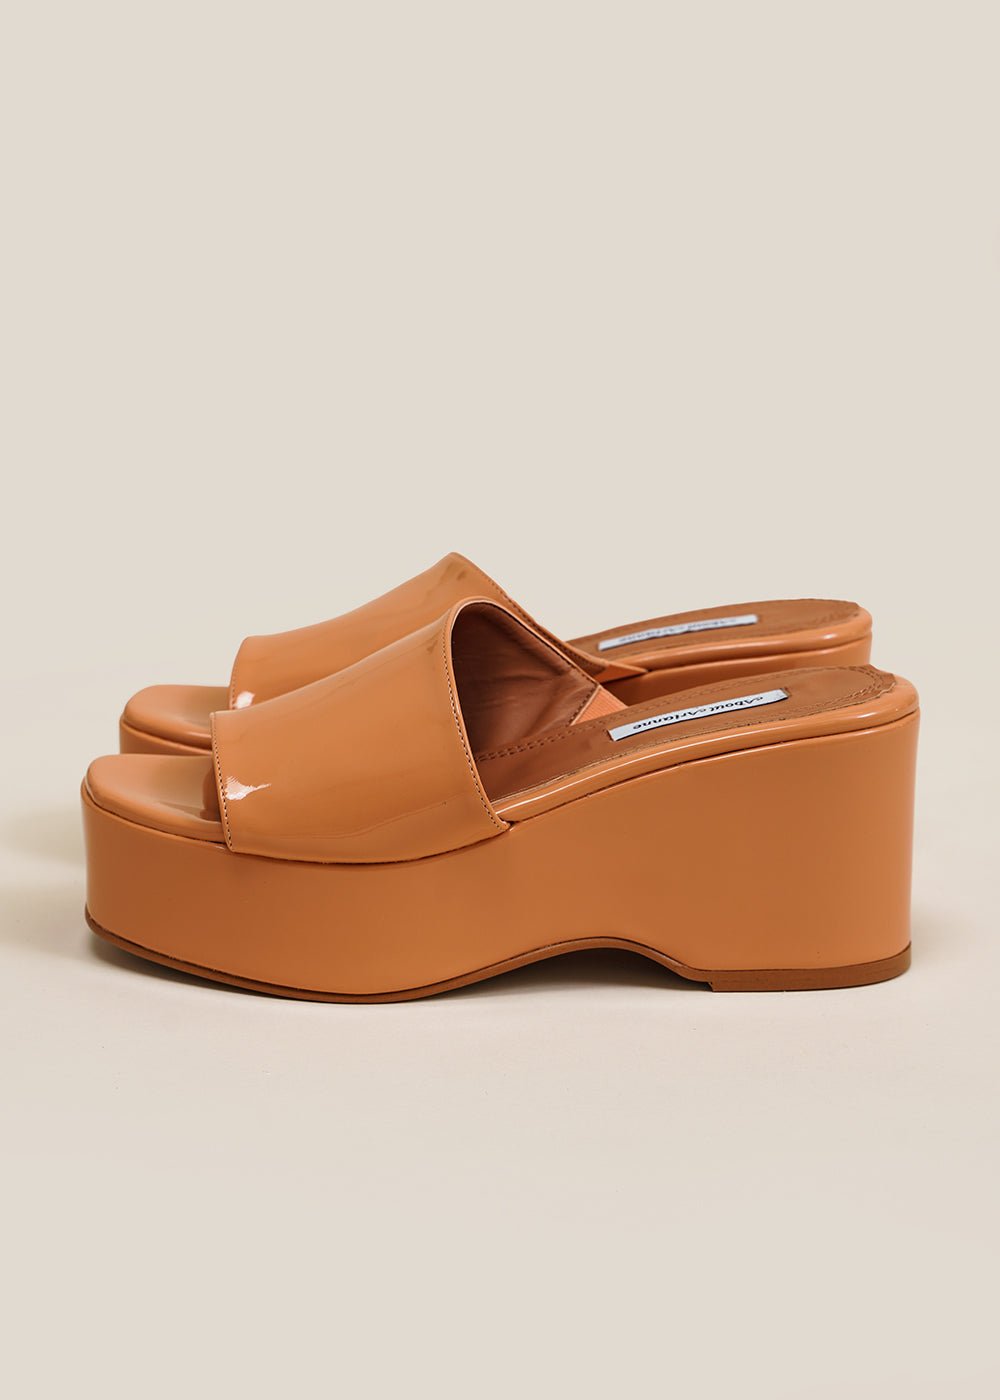 About Arianne Peach Giuliana Platform Sandals - New Classics Studios Sustainable Ethical Fashion Canada